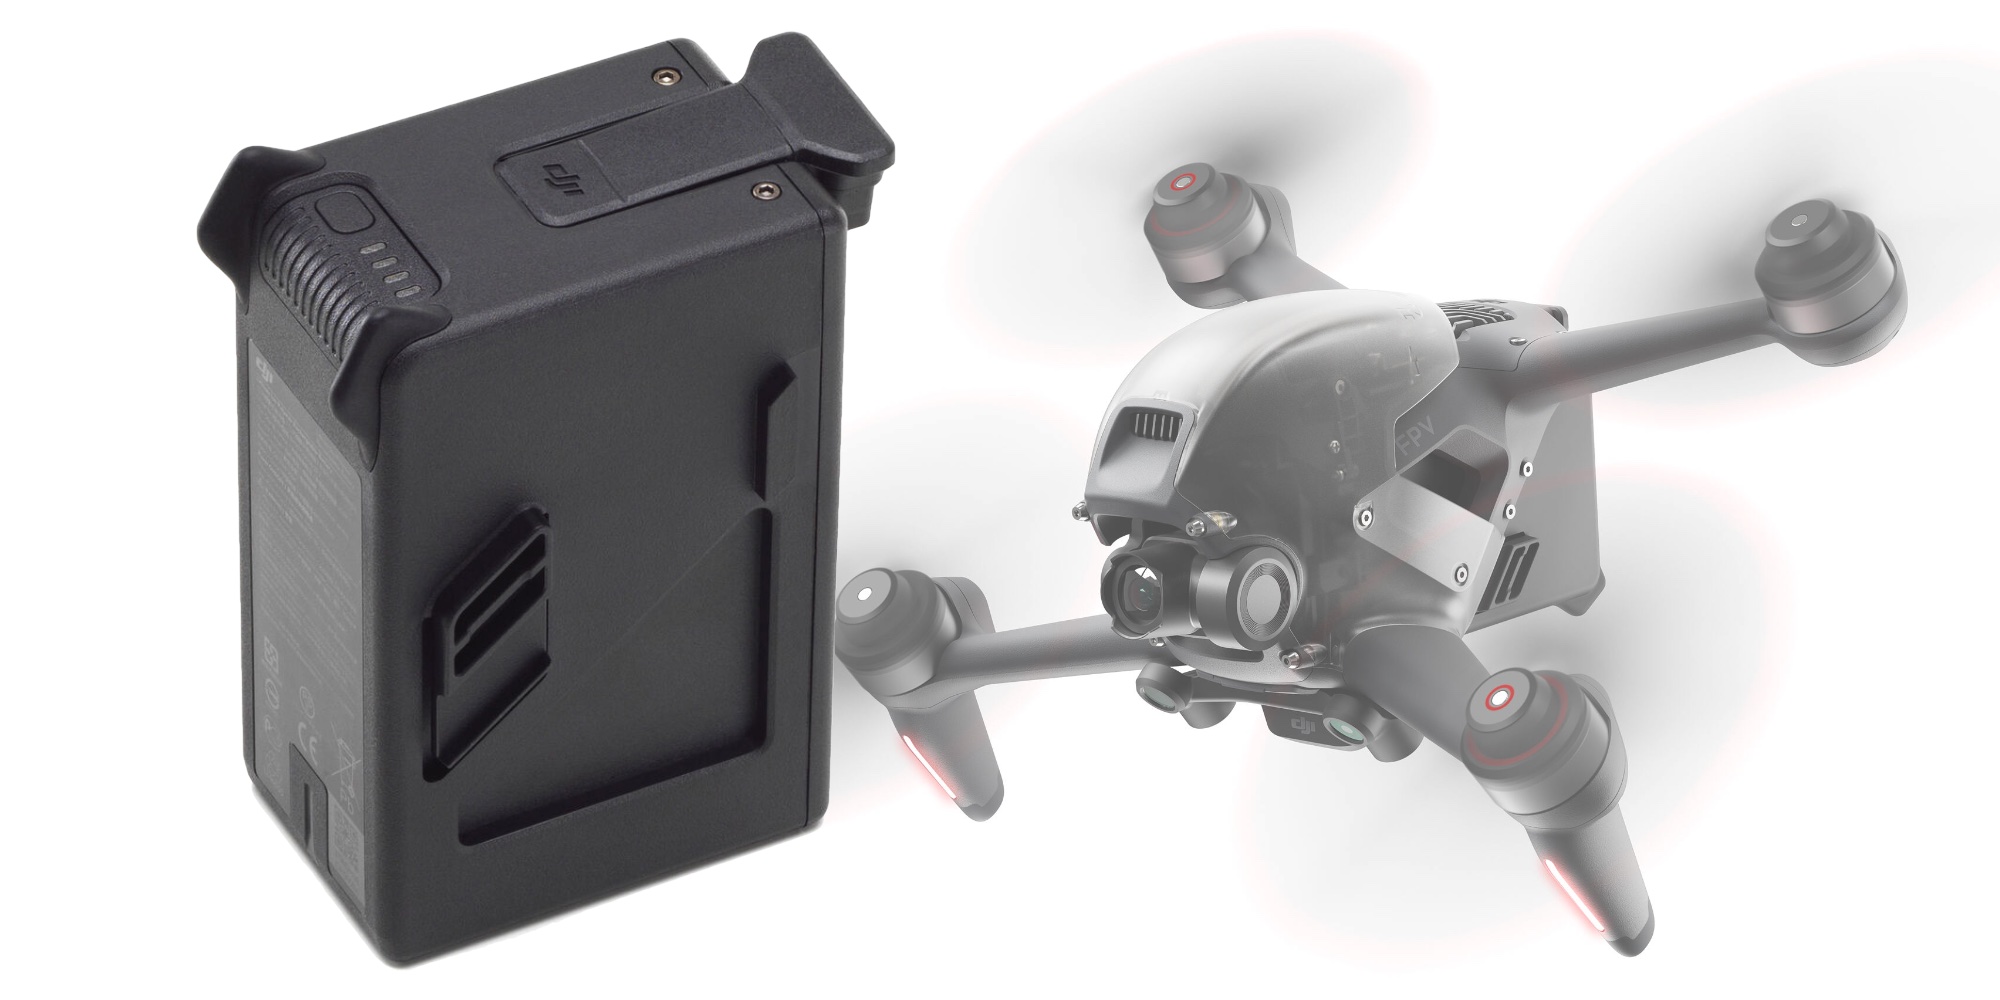 Extend your DJI FPV drone flight time with an extra official battery at